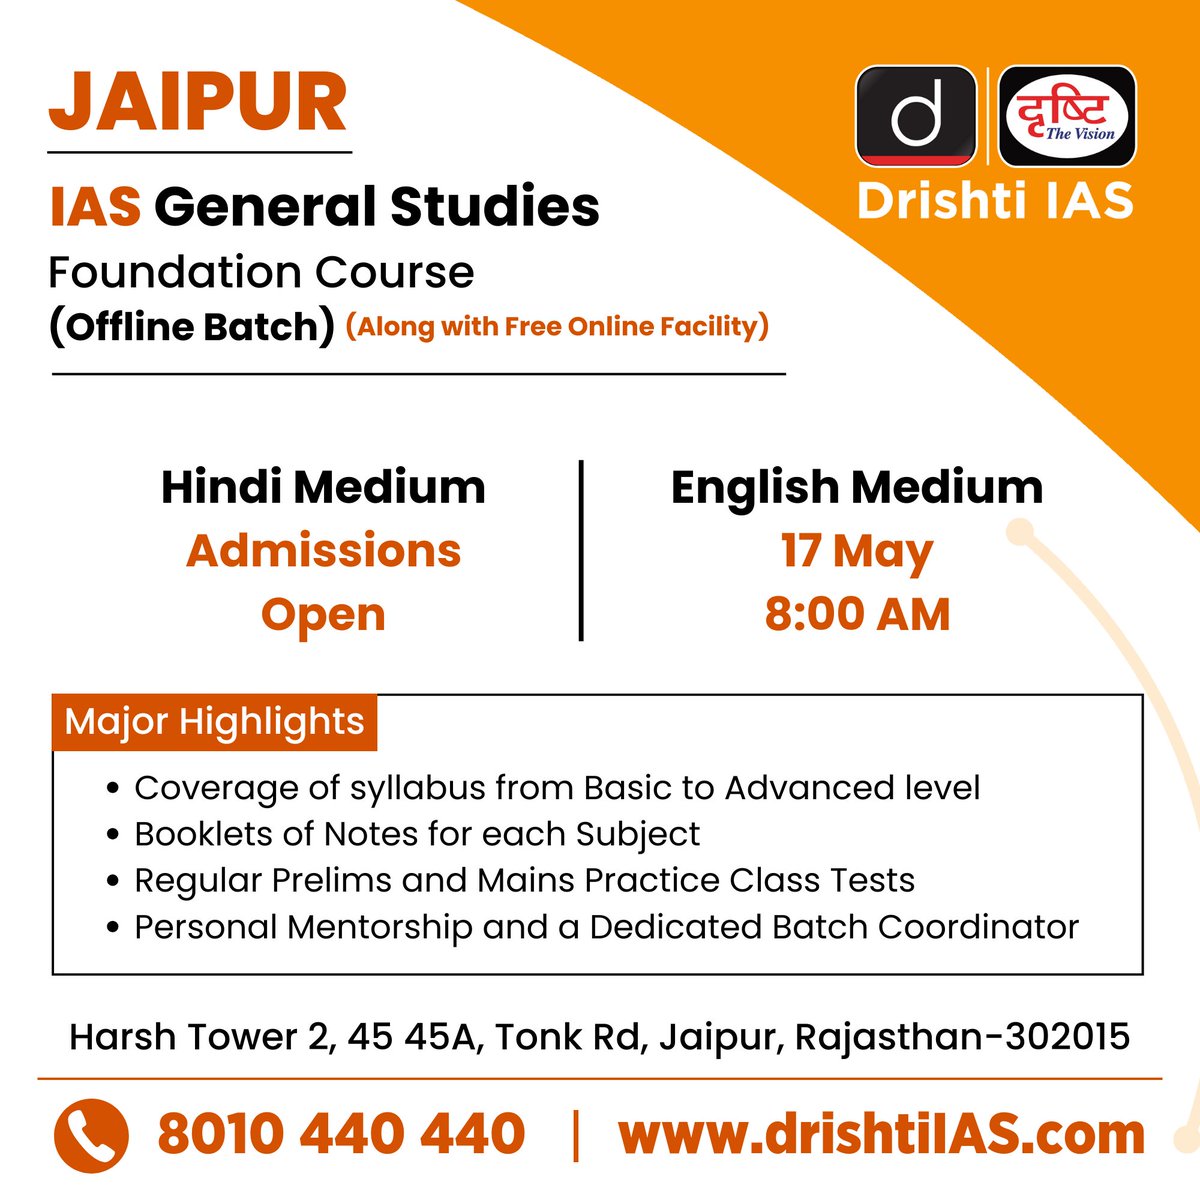 Join our #GSFoundation course - make the most of your time! Join Today! Register now: drishti.xyz/GSF-Registrati… #UPSC #IAS #CSE #UPSCPreparation #UPSCAspirants #Jaipur #Rajasthan #UPSC2024 #Prelims #NewBatch #Mains #Offline #UPSCPrelims #DrishtiIAS #DrishtiIASEnglish